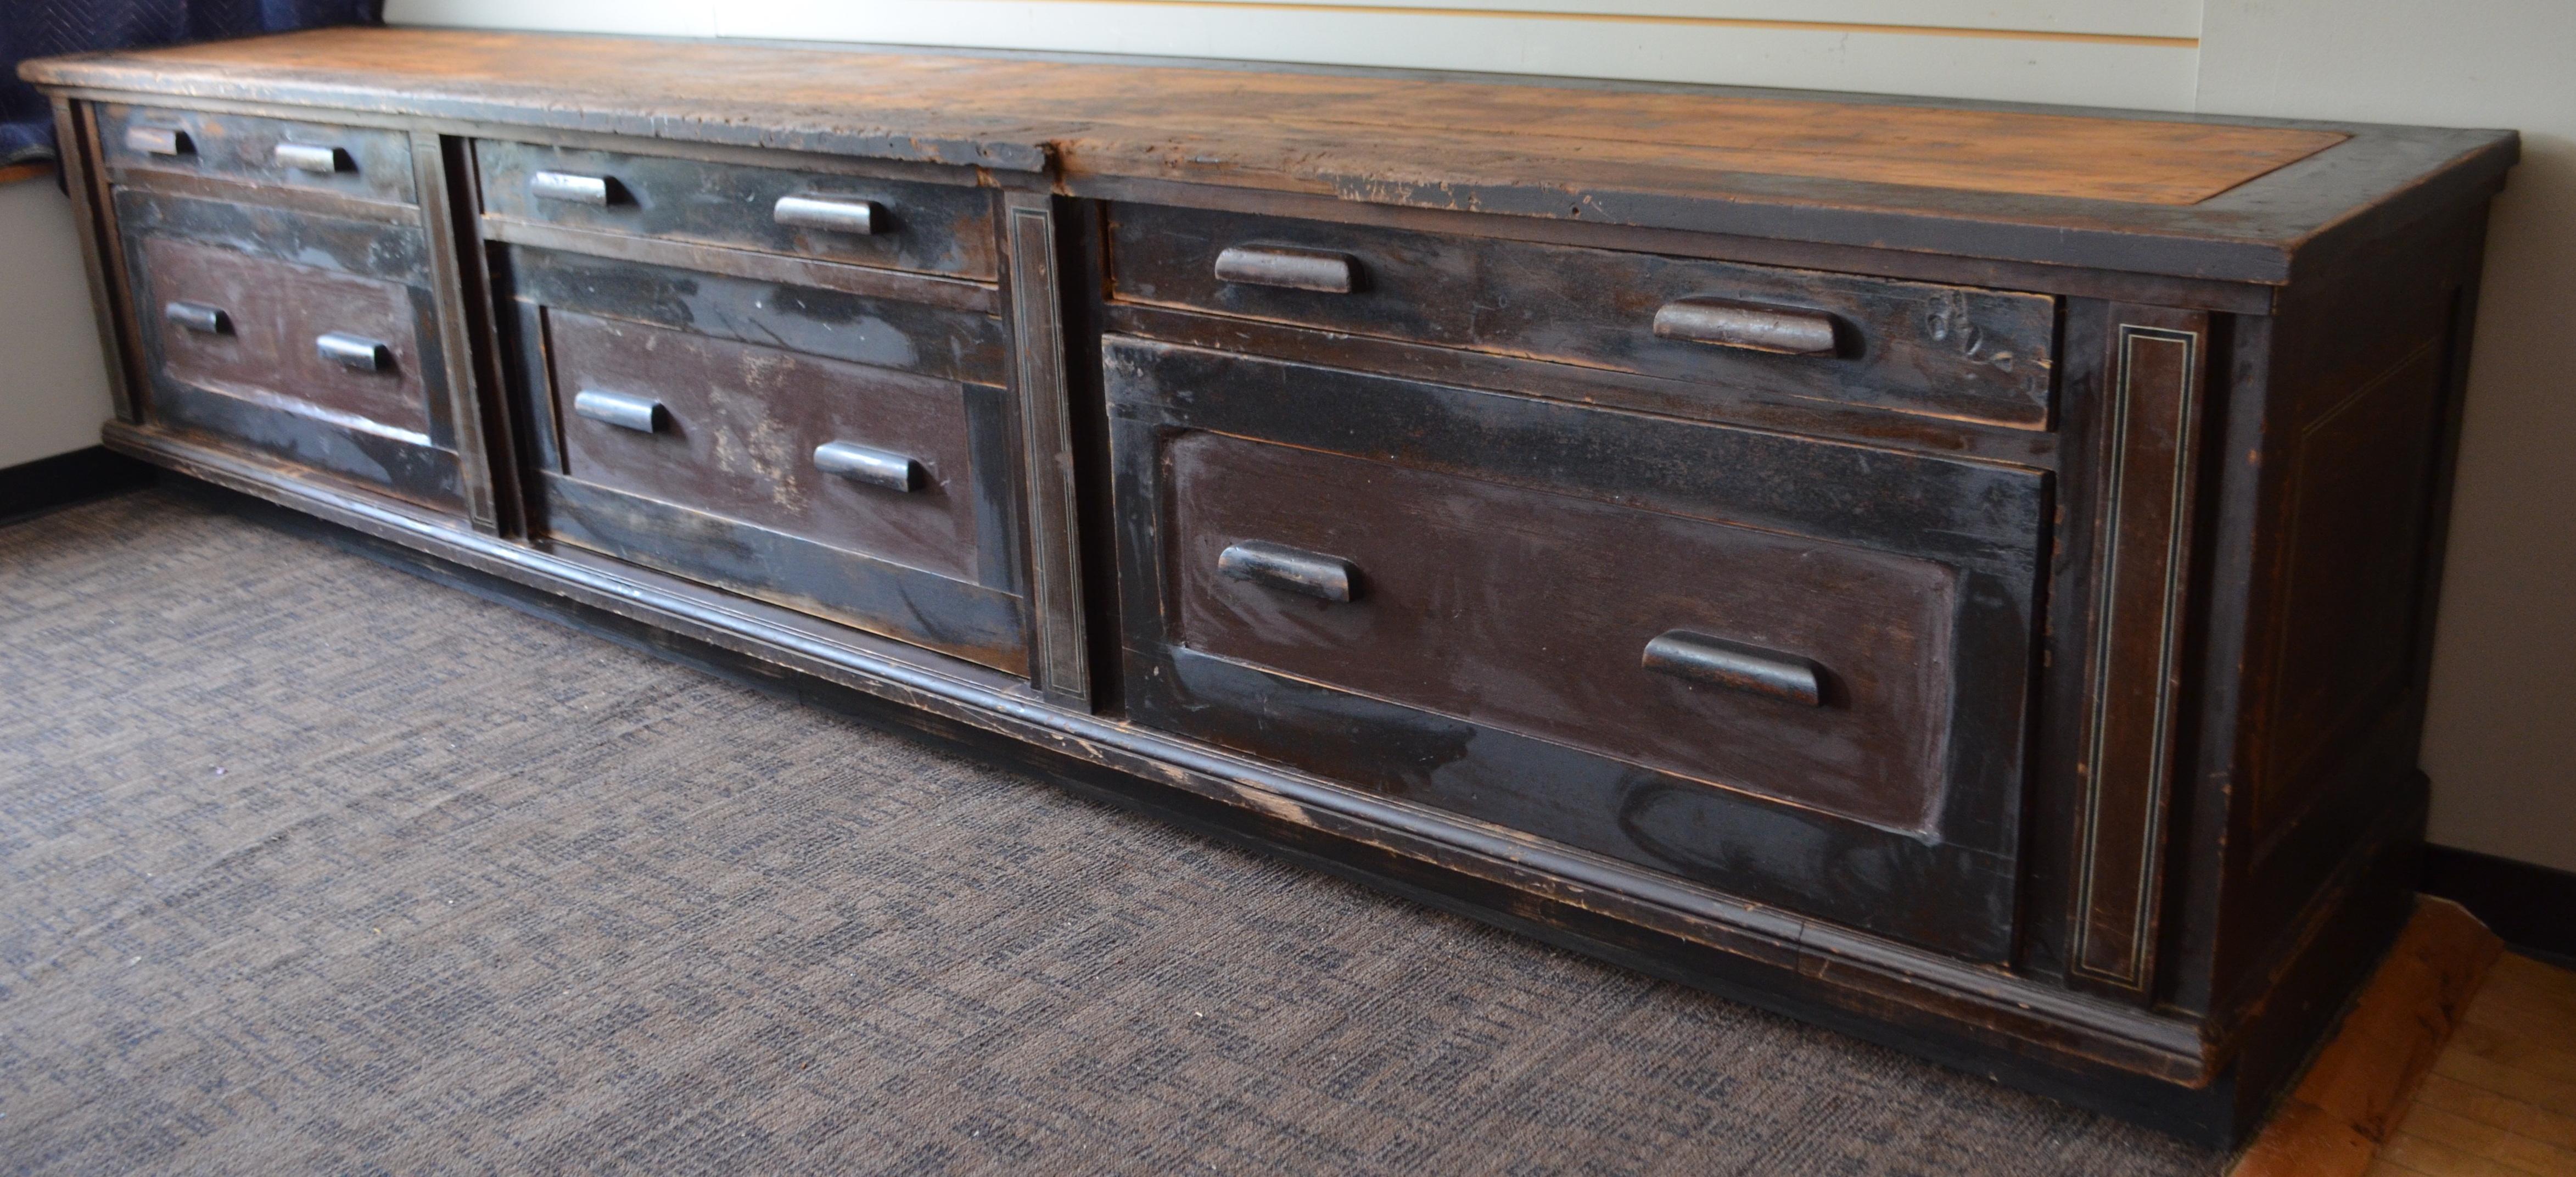 Impressive 12.5' long kitchen island from country store counter out of an 1850s farm in central Maine. Counter served as a work and storage unit in the barn of that Yankee farmstead for decades as evidenced by the amazing patina and character marks